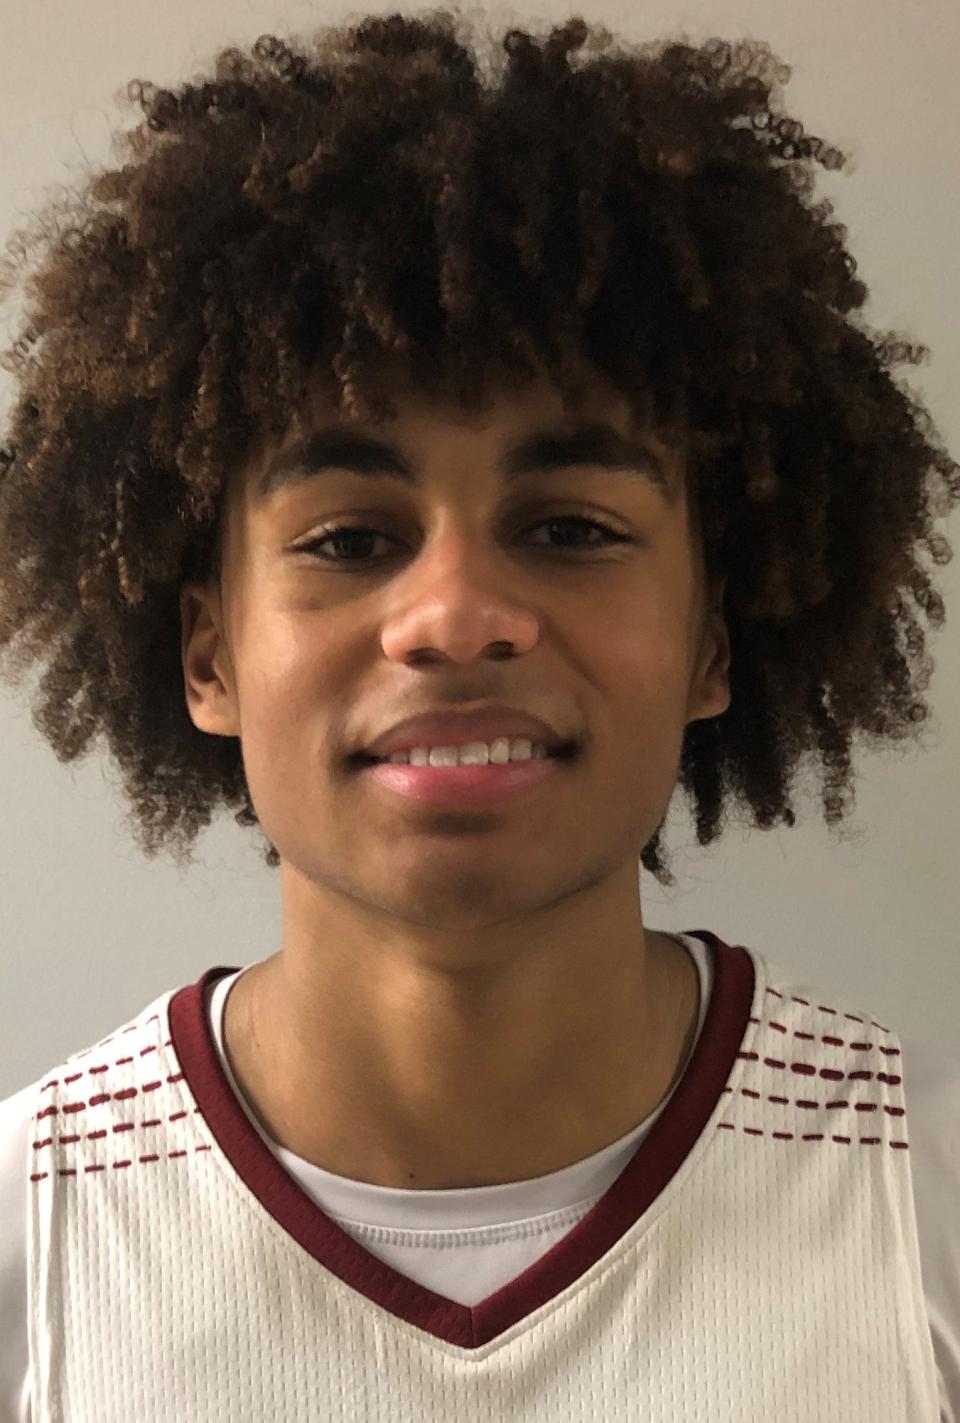 Newark junior Braylon Morris scored 19 points, had five 3-pointers and came up with four steals in a win over Austintown Fitch on Sunday.